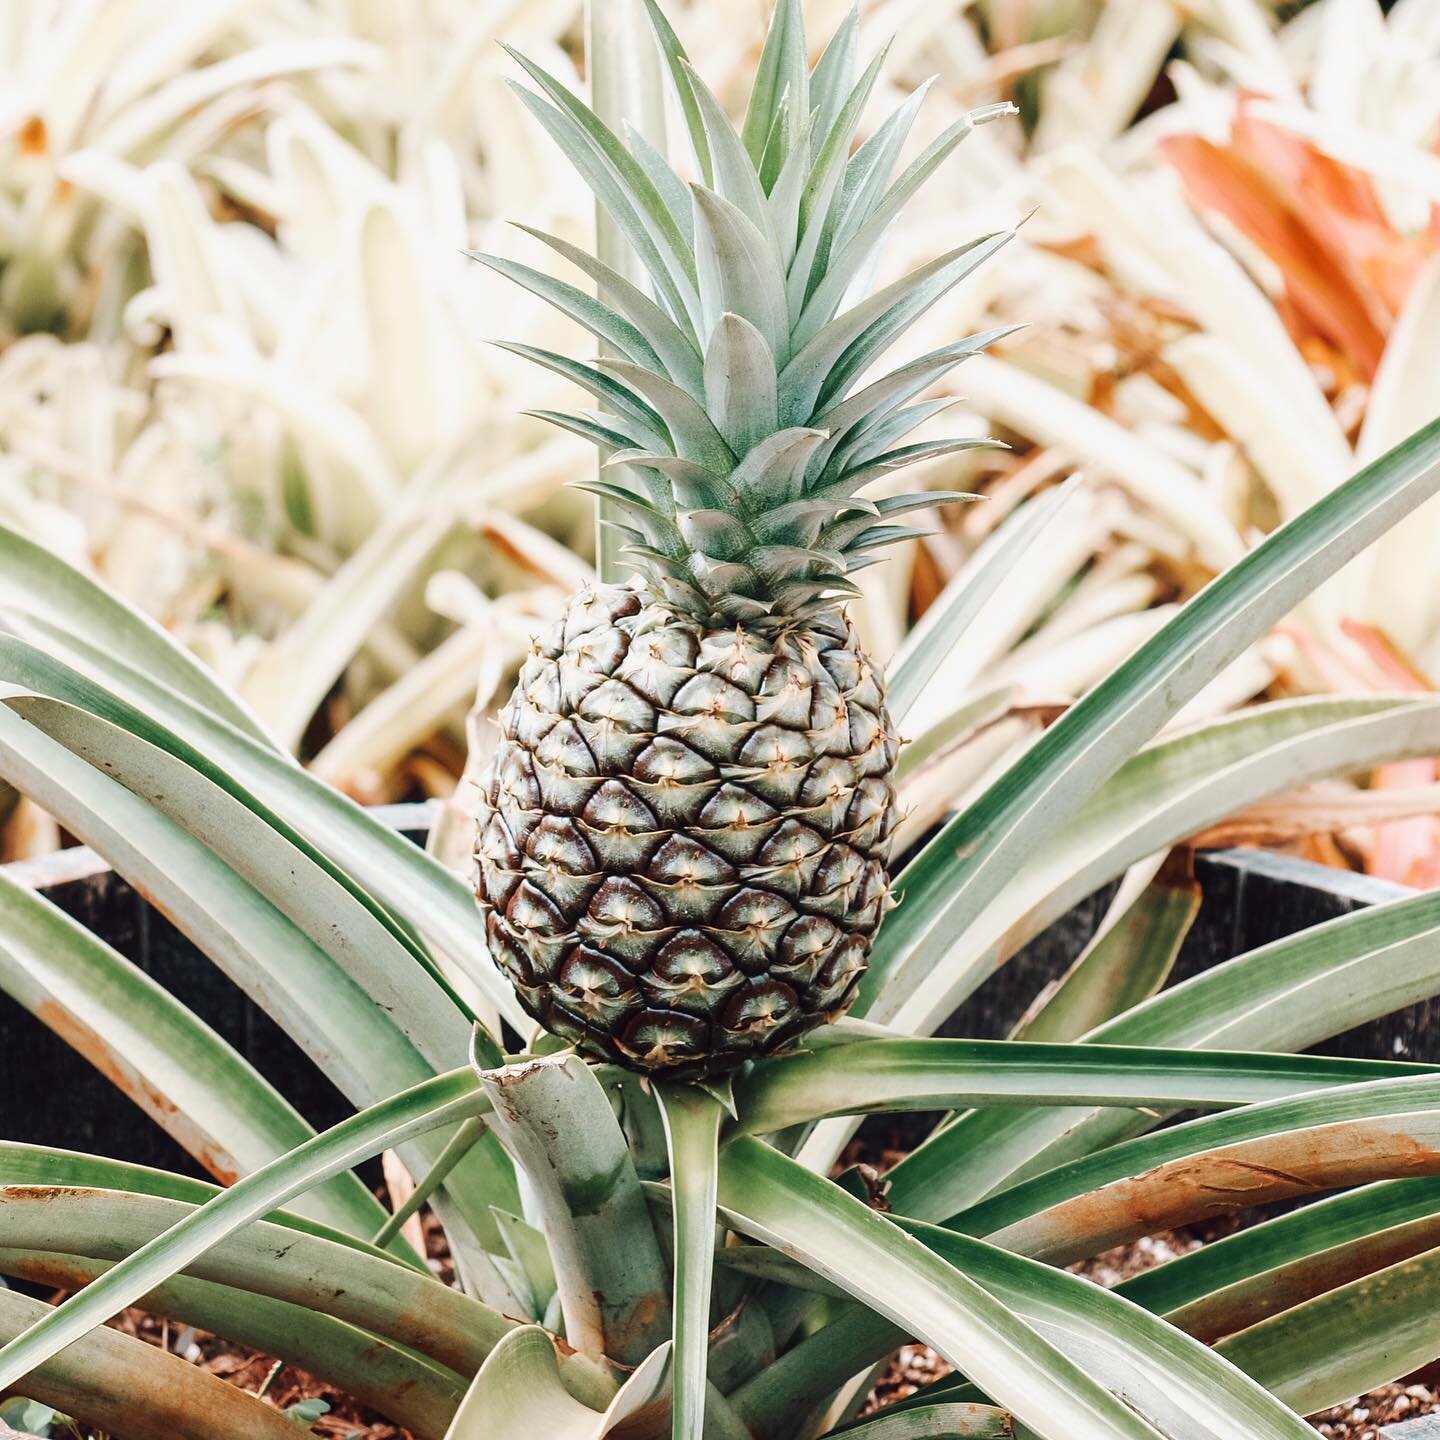 Who didn&rsquo;t know that pineapples grow like this?